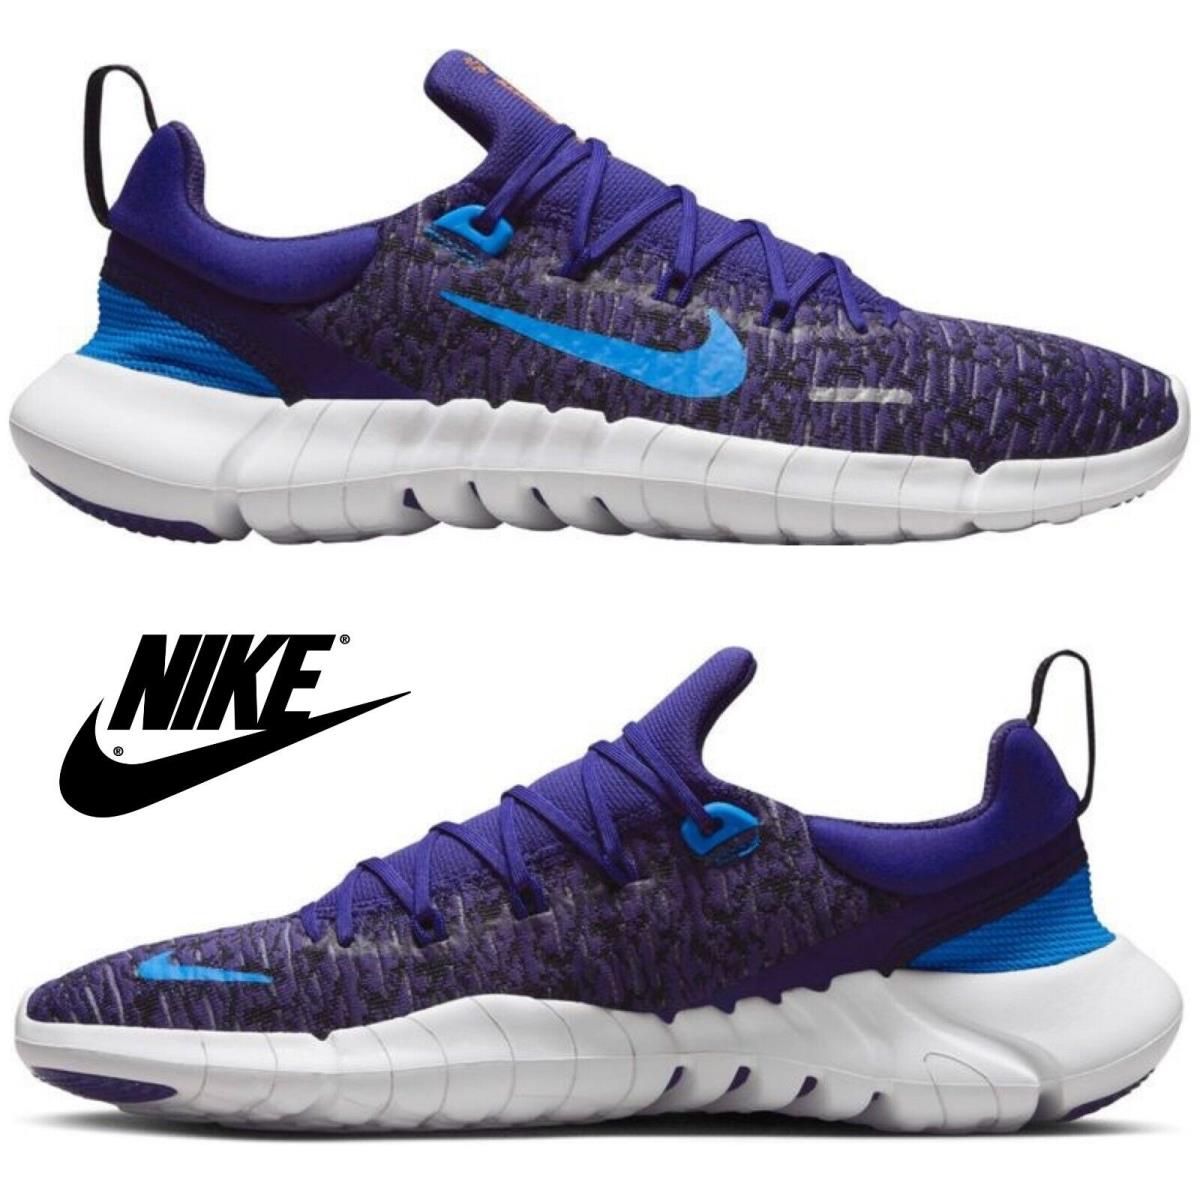 Nike Men`s Free Run 5.0 Running Shoes Training Athletic Sport Casual Sneakers - Blue, Manufacturer: Deep Royal Blue/Photo Blue